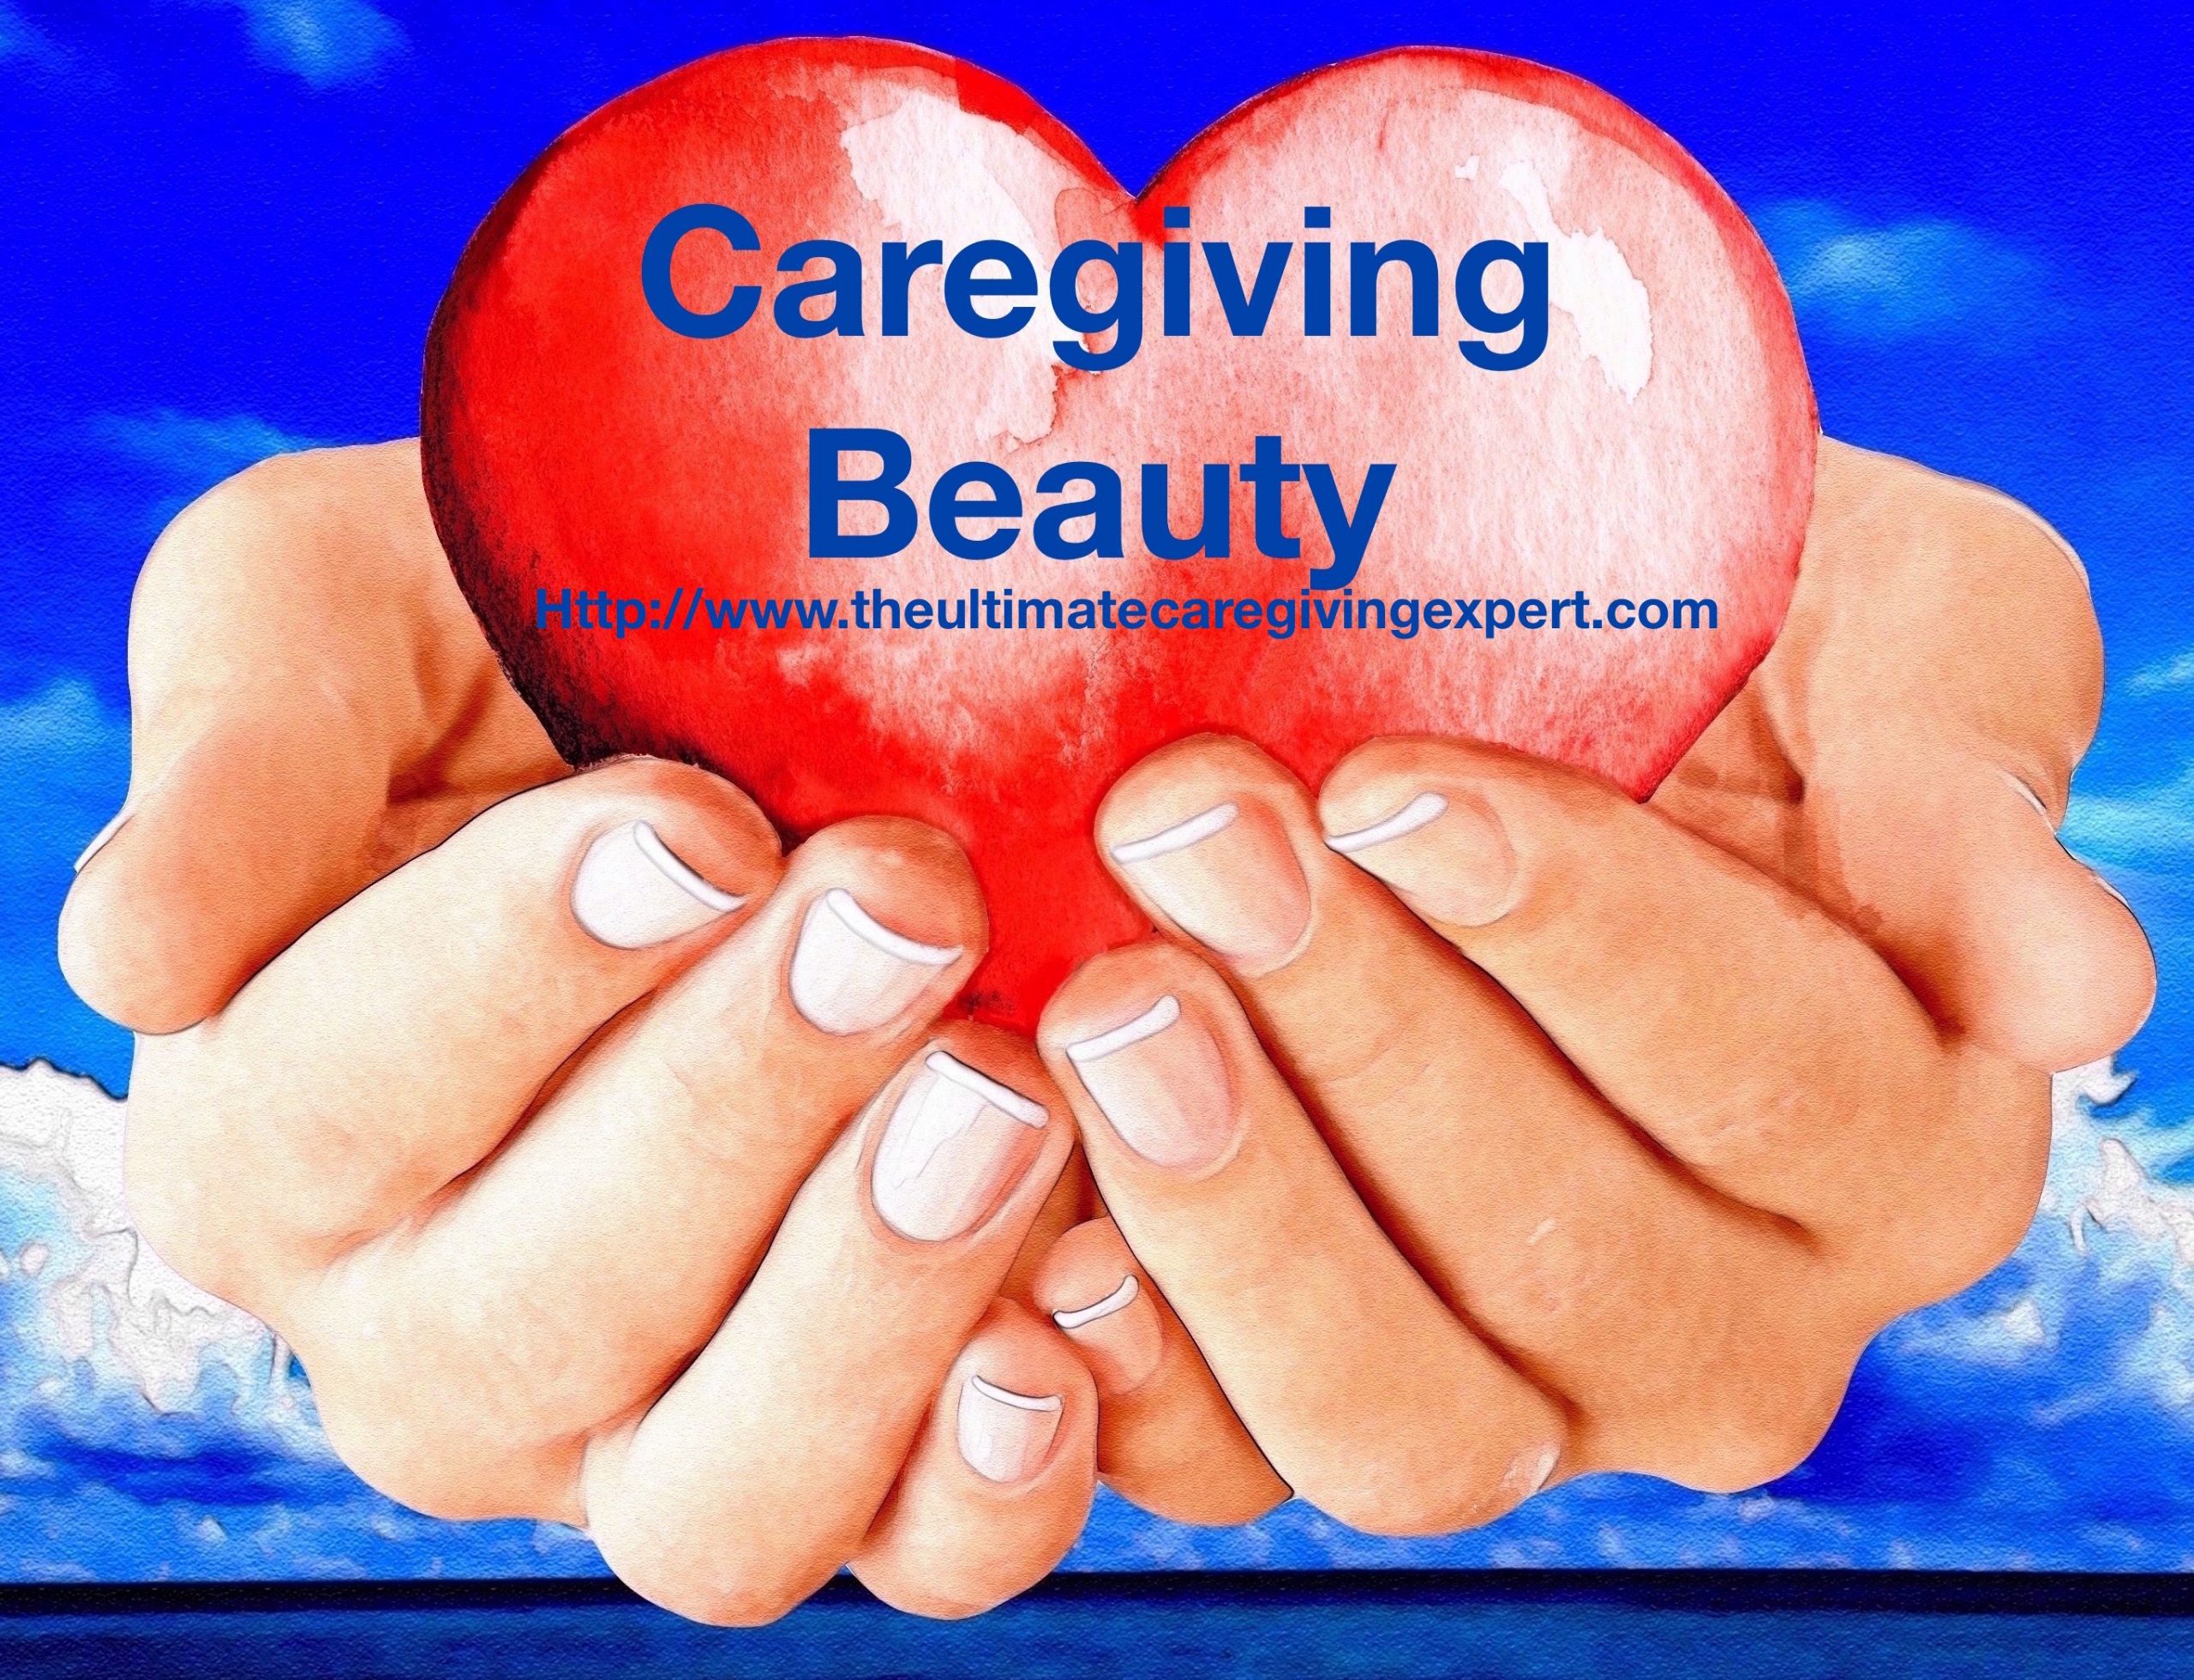 Pin by The Ultimate Caregiving Expert on Caregiving Beauty ...